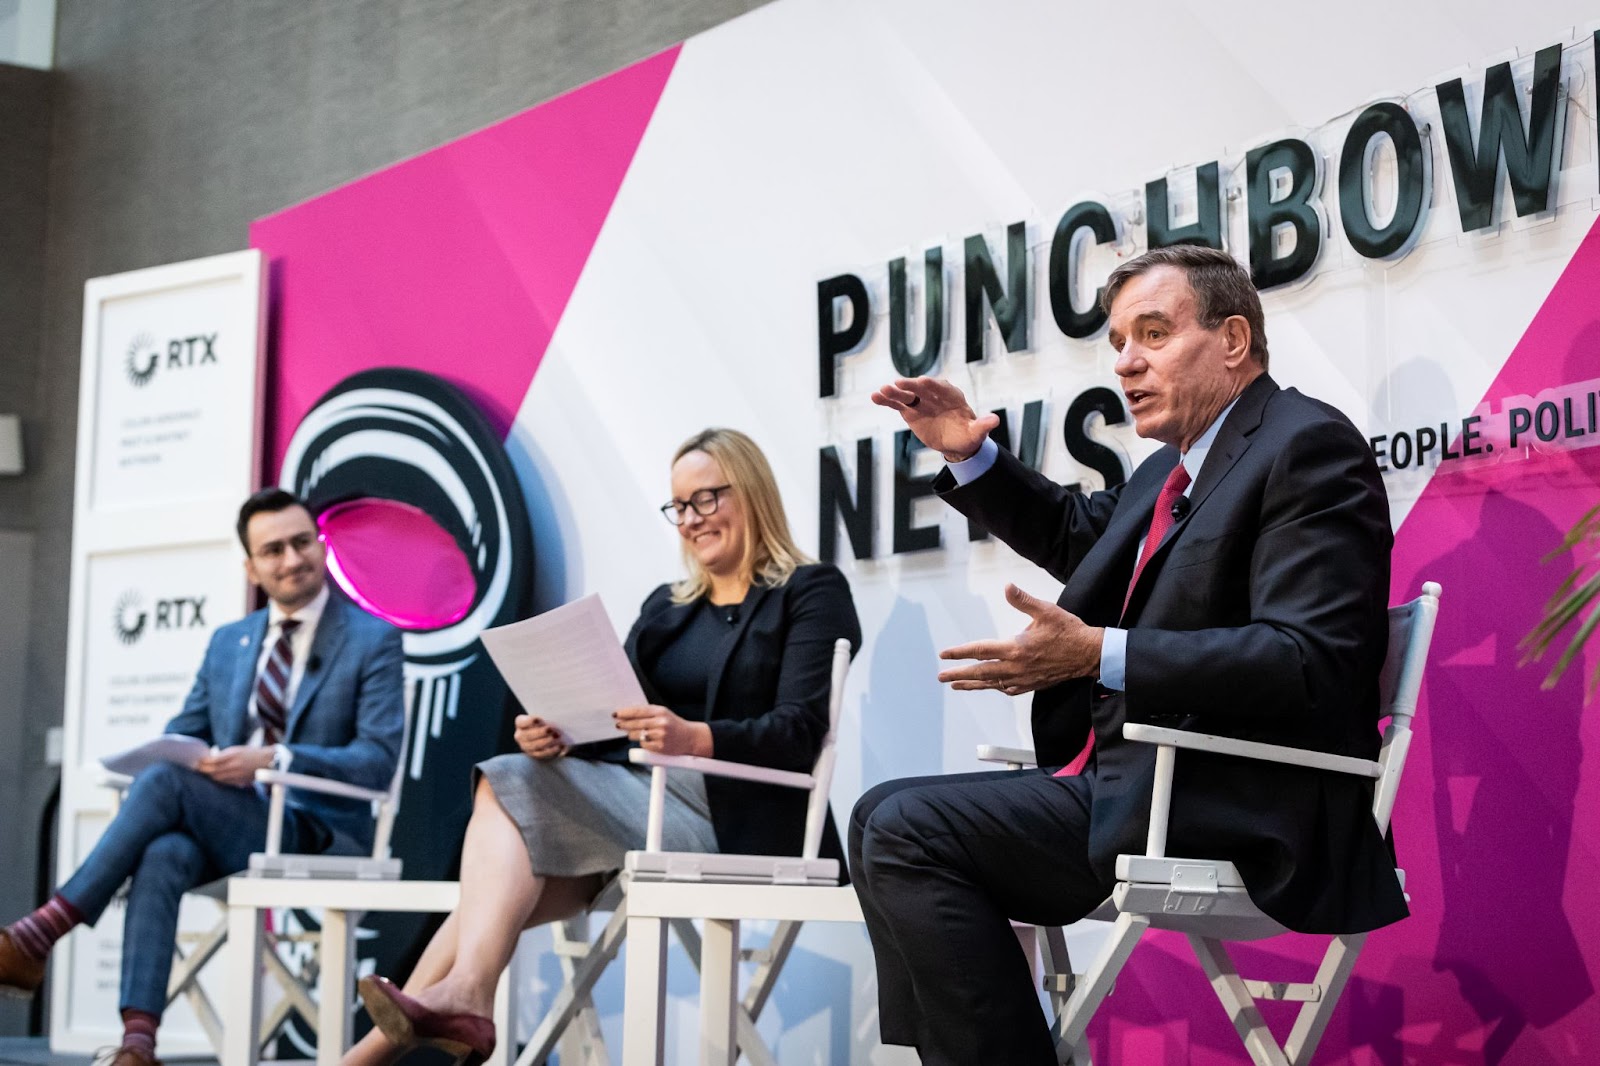 Sen. Mark Warner speaking at a Punchbowl News event with Anna Palmer and Andrew Desiderio.